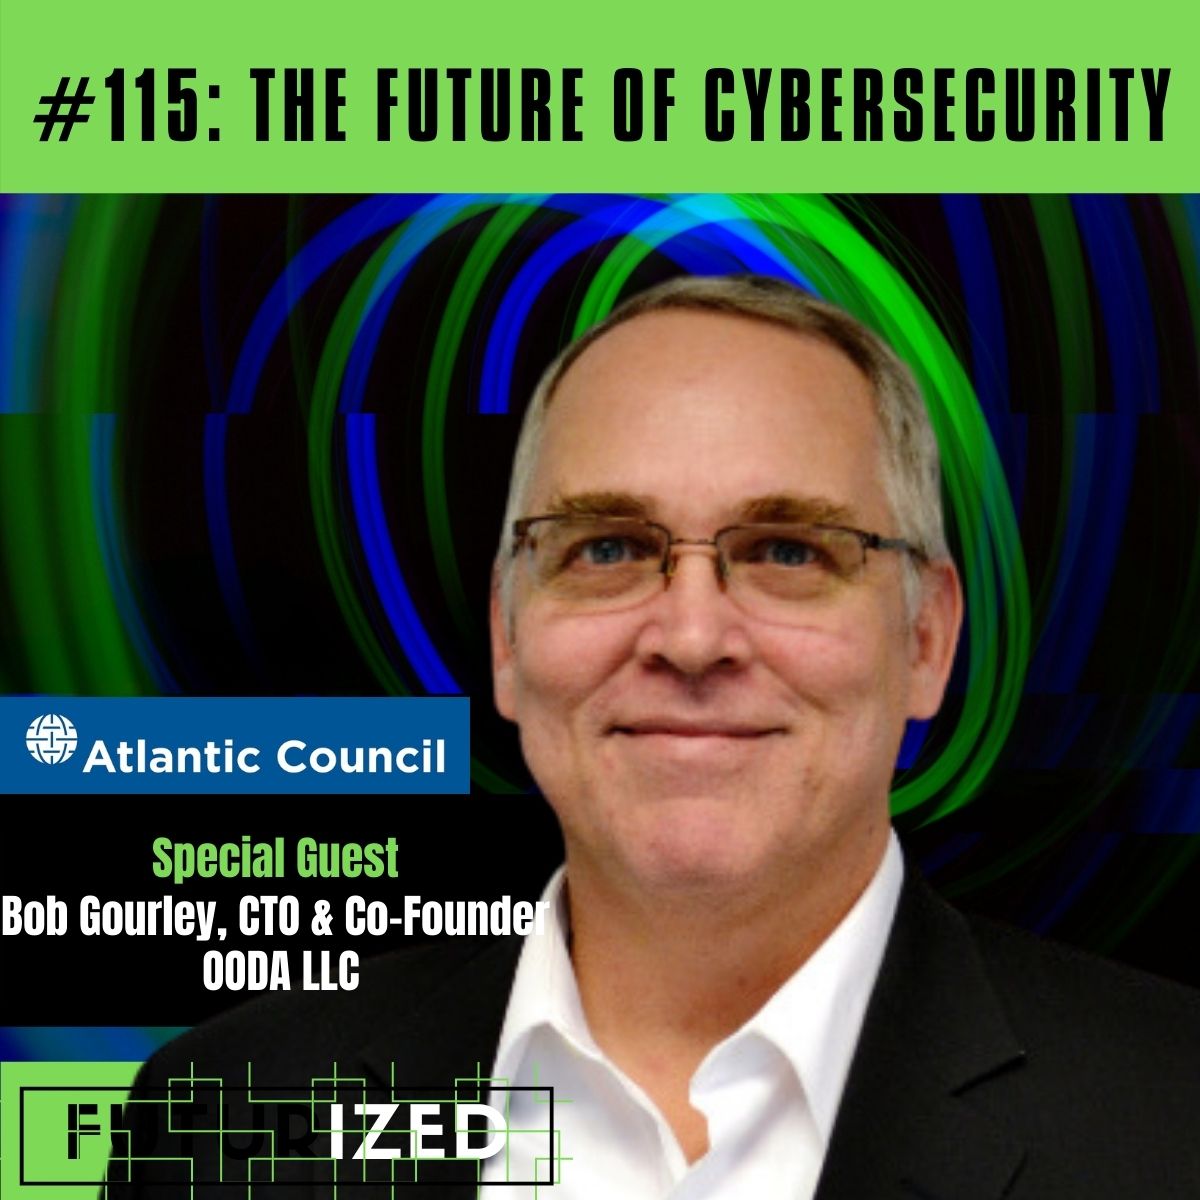 The Future of Cybersecurity Image